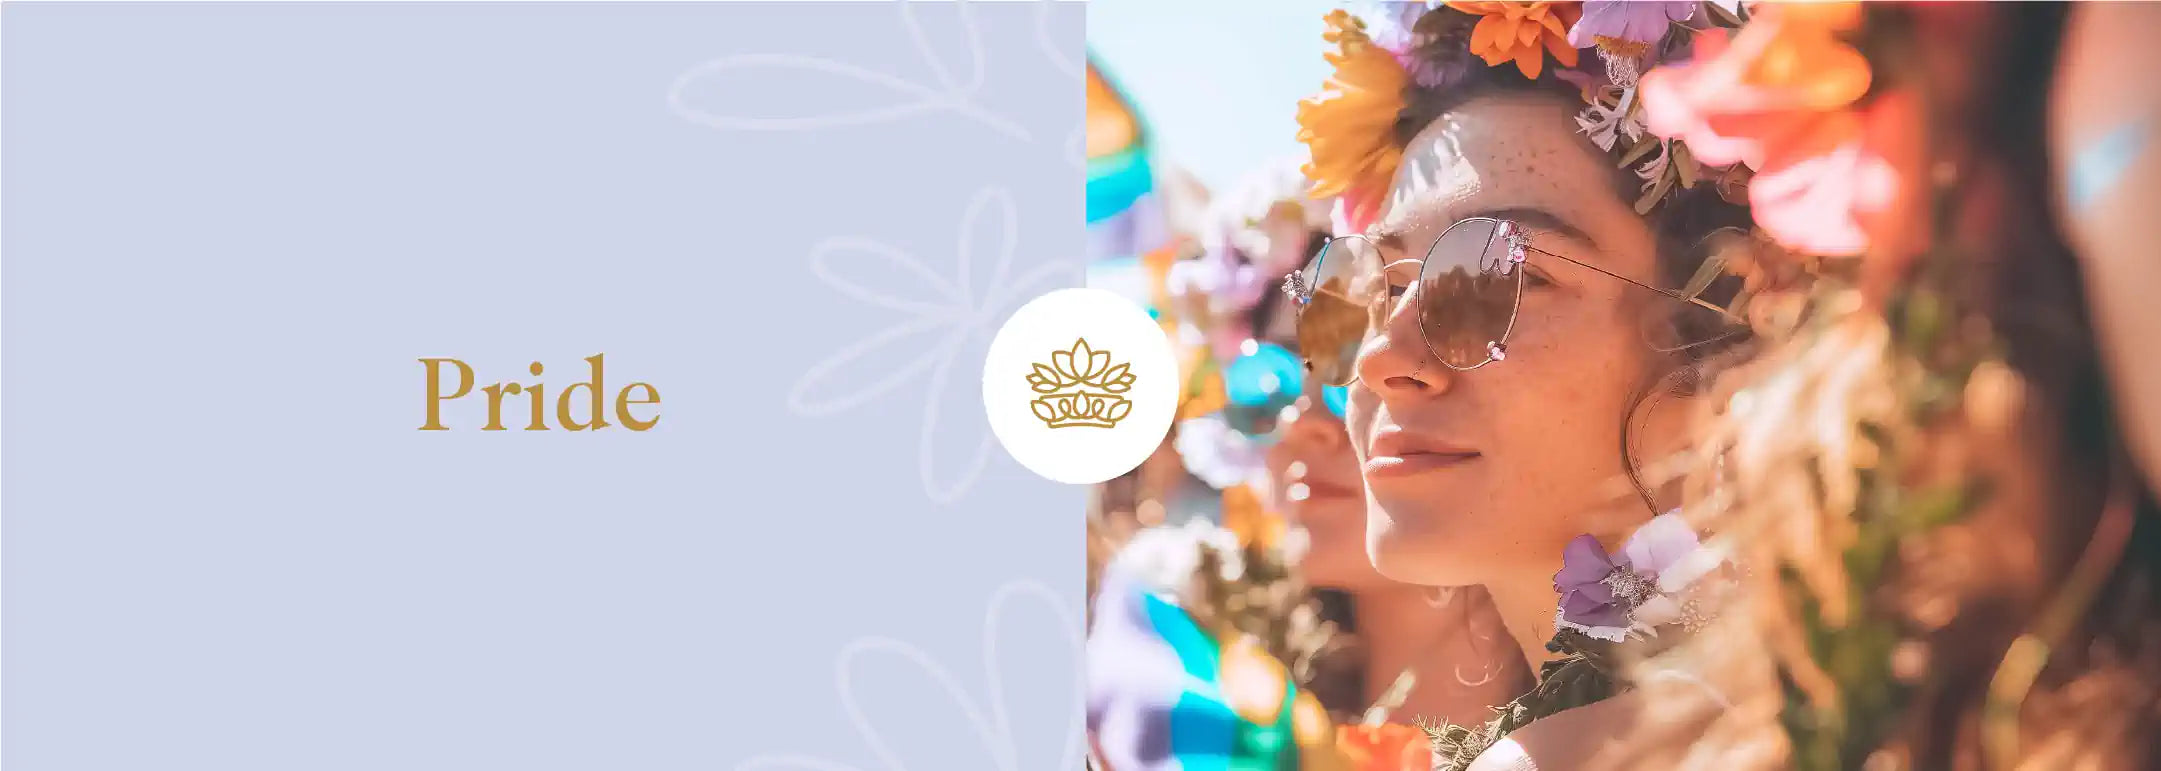 A person exuding confidence and joy, adorned with a colorful flower crown and chic sunglasses, celebrating diversity and self-expression during a Pride event - Fabulous Flowers and Gifts.